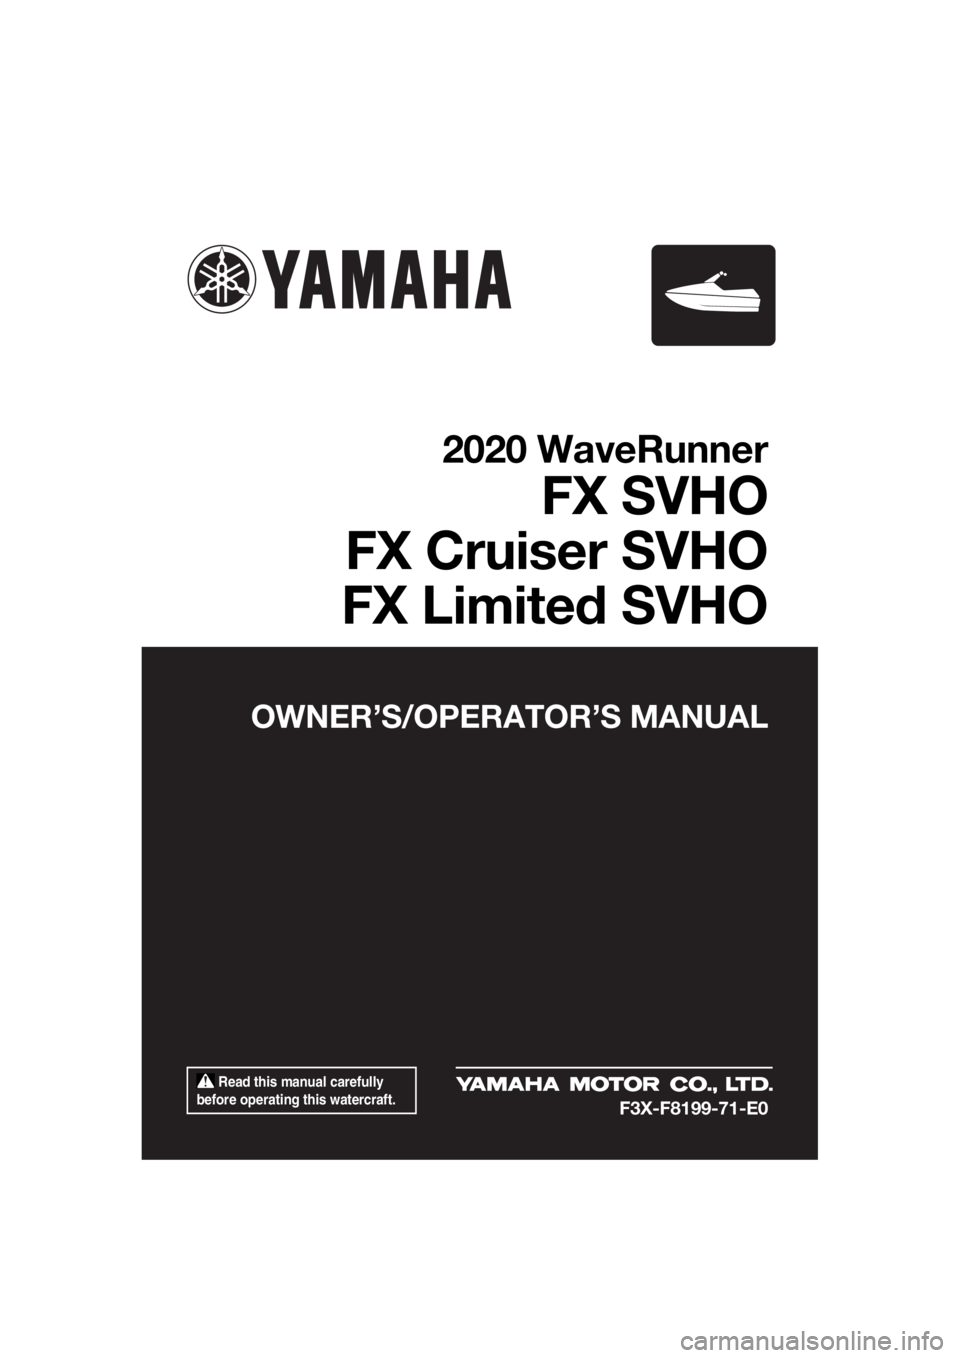 YAMAHA FX SVHO 2020  Owners Manual  Read this manual carefully 
before operating this watercraft.
OWNER’S/OPERATOR’S MANUAL
2020 WaveRunner
FX SVHO
FX Cruiser SVHO
FX Limited SVHO
F3X-F8199-71-E0
UF3X71E0.book  Page 1  Monday, July